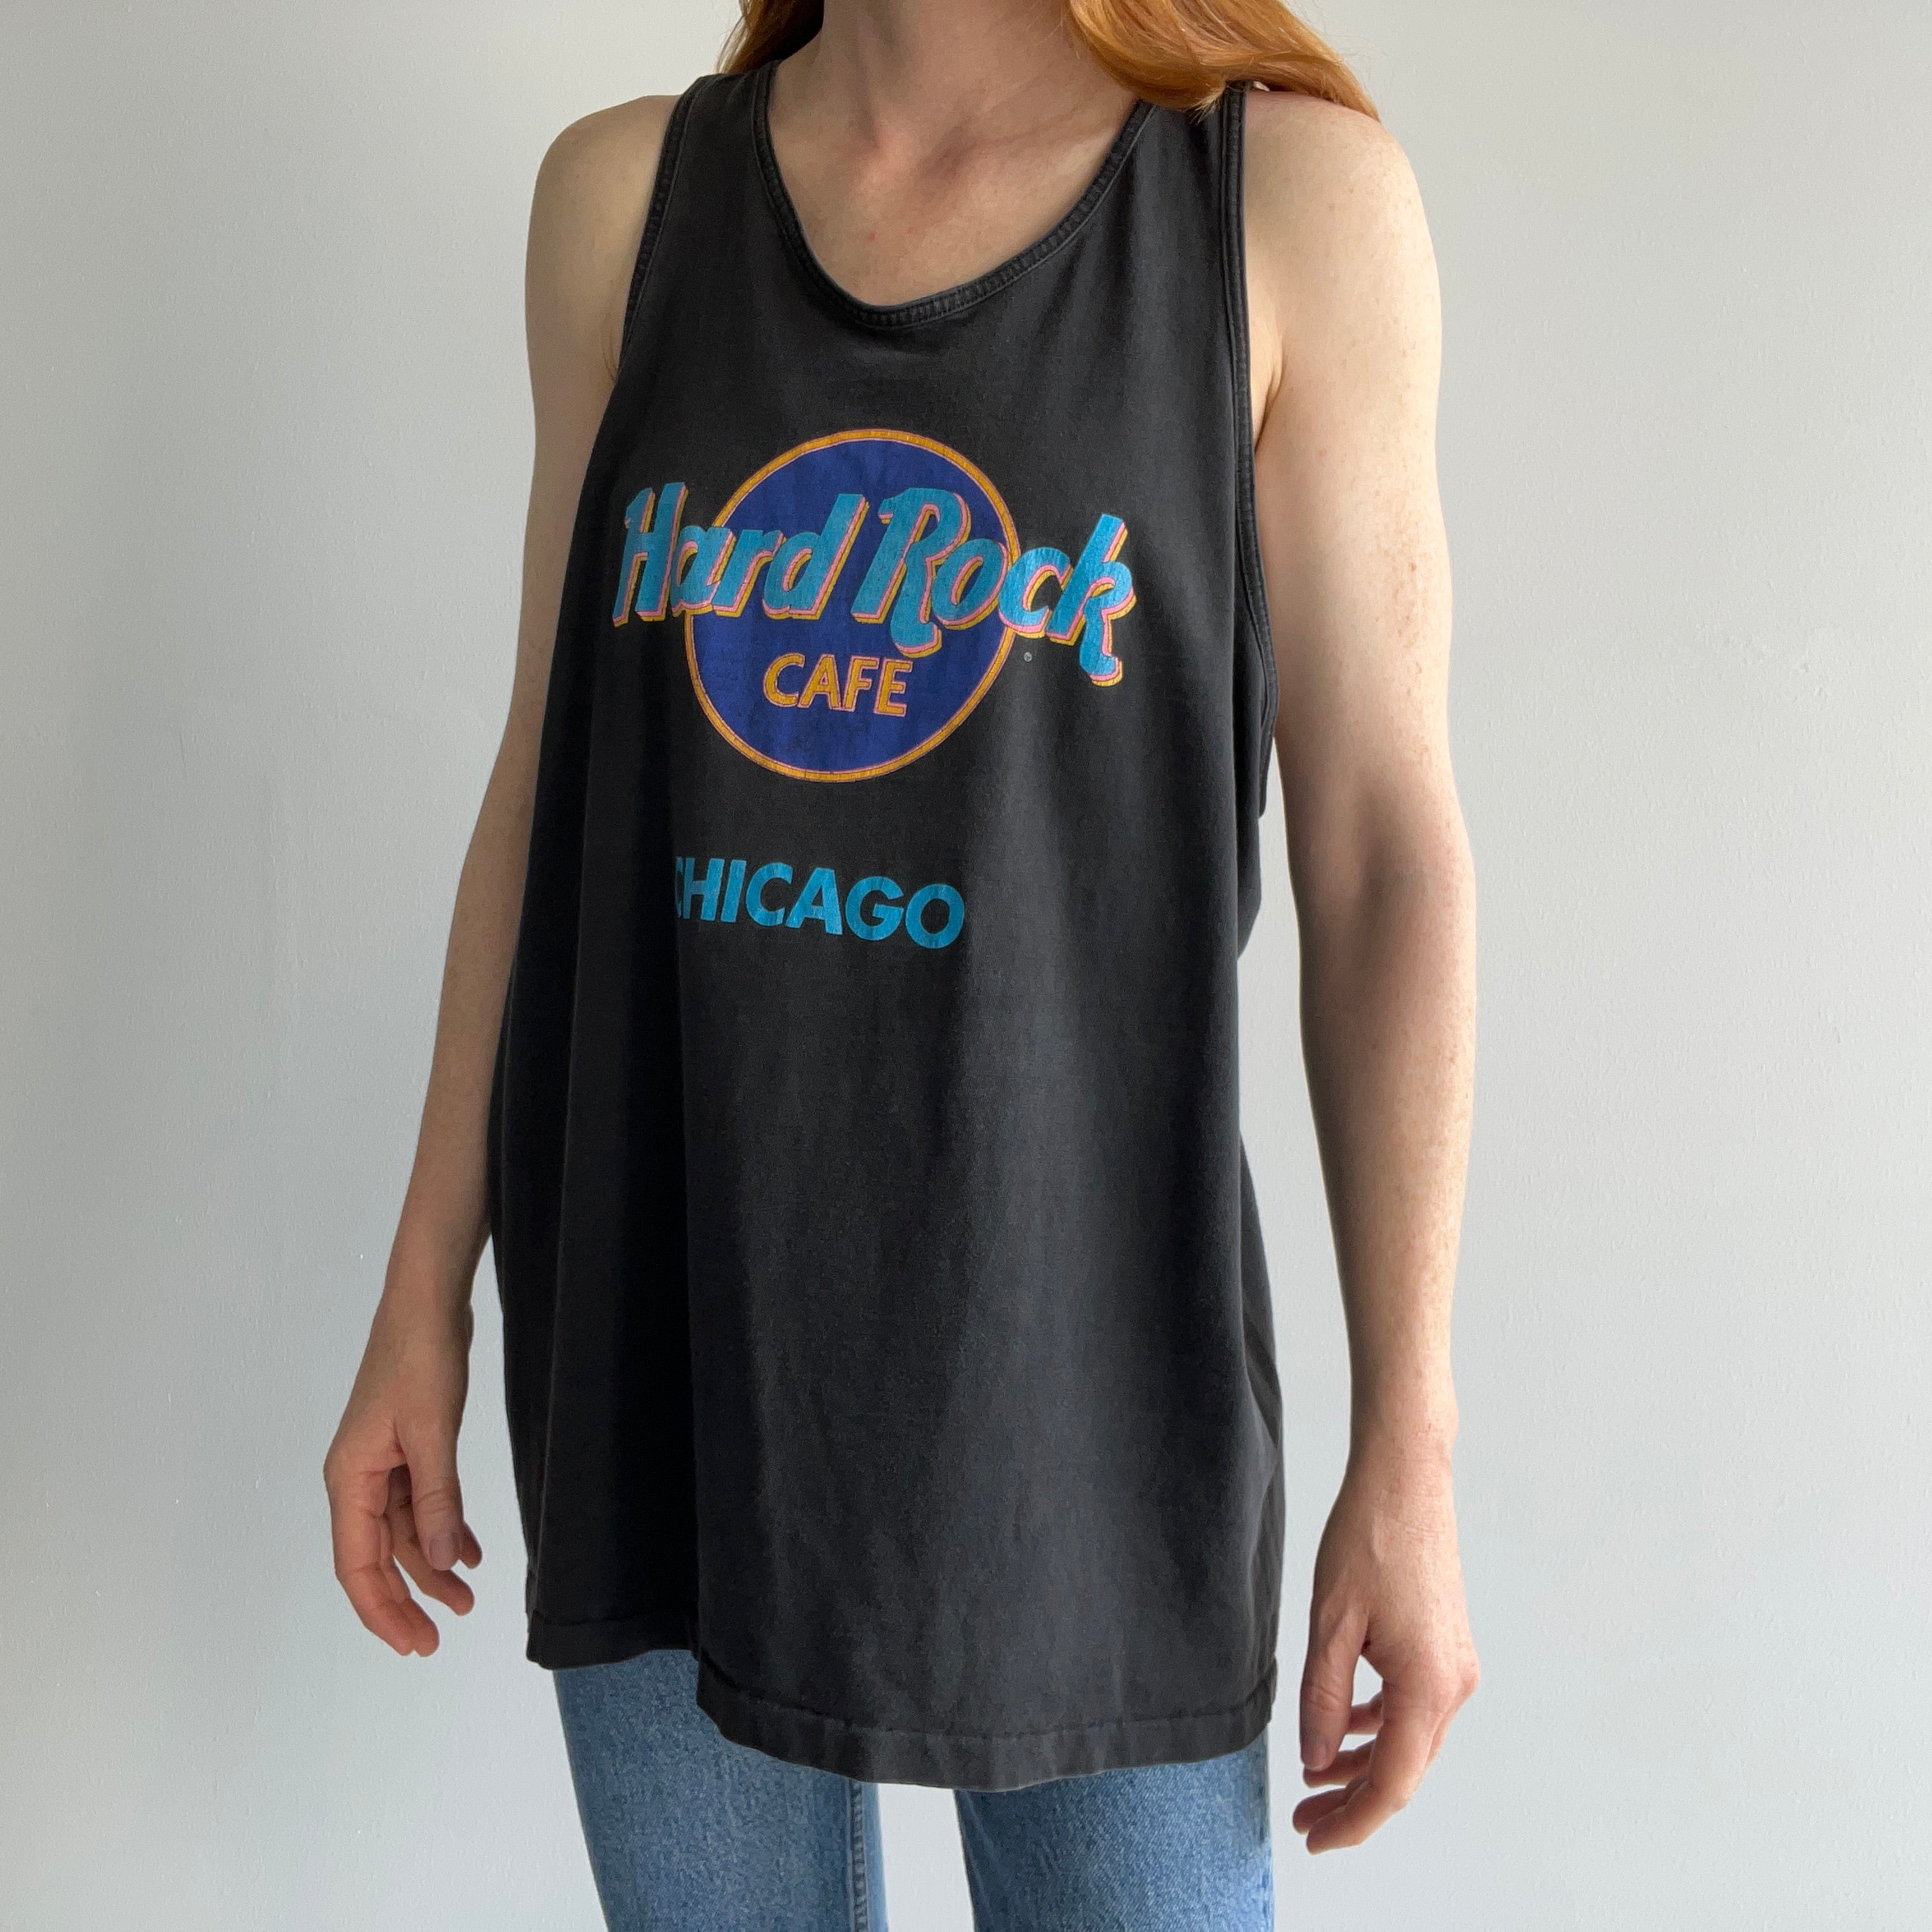 1990s Hard Rock Cafe Chicago Cotton Tank Top